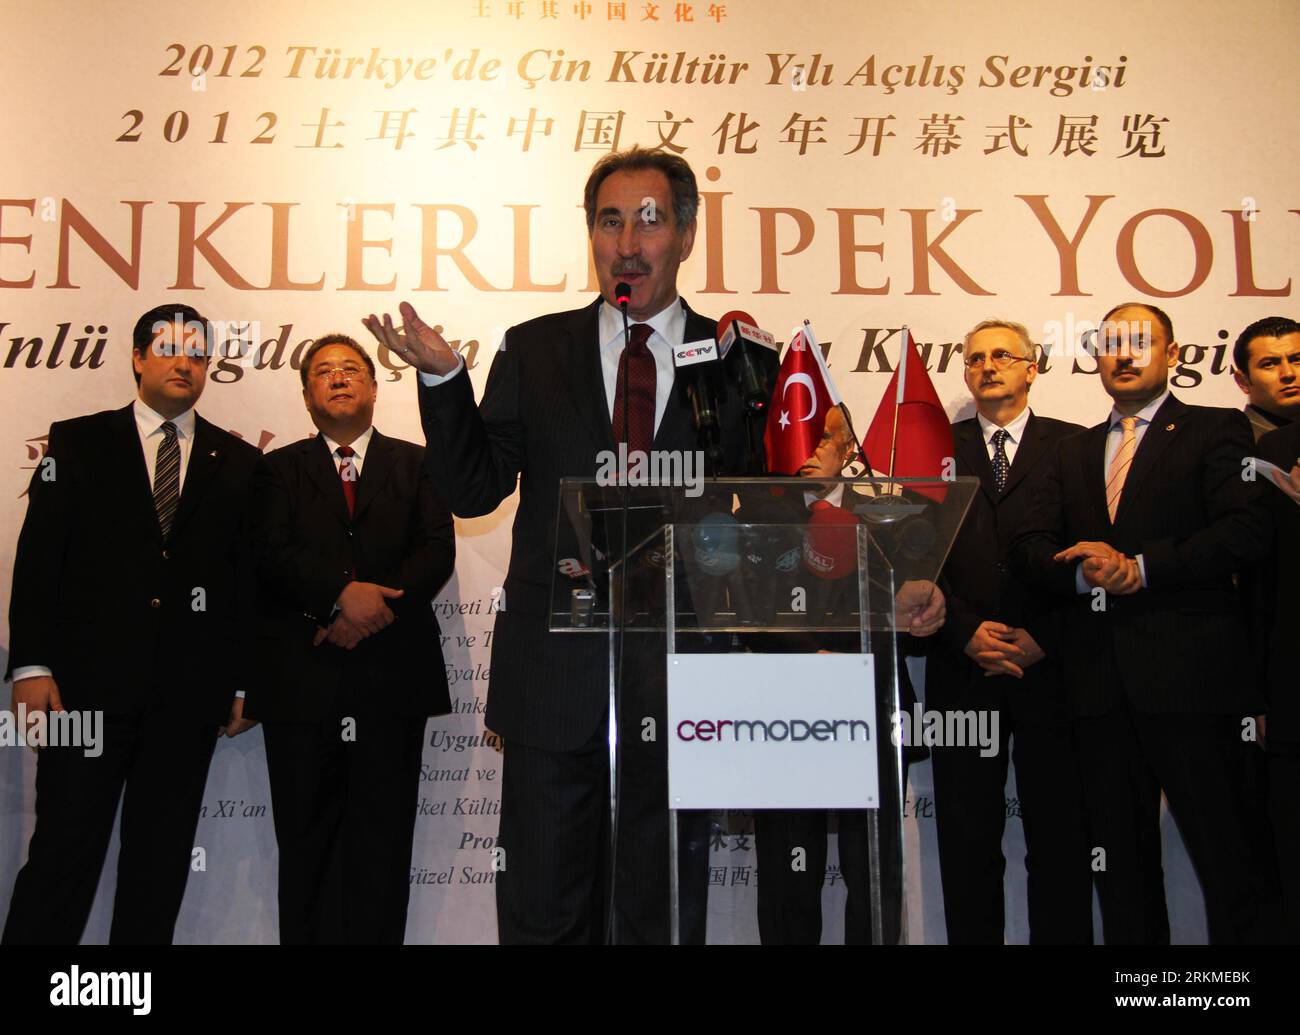 Bildnummer: 56691851  Datum: 12.12.2011  Copyright: imago/Xinhua (111212) -- ANKARA, Dec. 12, 2011 (Xinhua) -- Turkish Minister of Culture and Tourism Ertugrul Gunay gives a speech at the opening of the 2012 China Culture Year in Ankara, Turkey, Dec. 12, 2011. Under the agreement between China and Turkey, the two countries will host the culture year in Turkey in 2012 and in China in 2013. (Xinhua/Wang Hongjiang) TURKEY-ANKARA-CHINA CULTURE YEAR PUBLICATIONxNOTxINxCHN People Politik Kultur Pressetermin Kulturjahr xbs x0x 2011 quer premiumd      56691851 Date 12 12 2011 Copyright Imago XINHUA  A Stock Photo